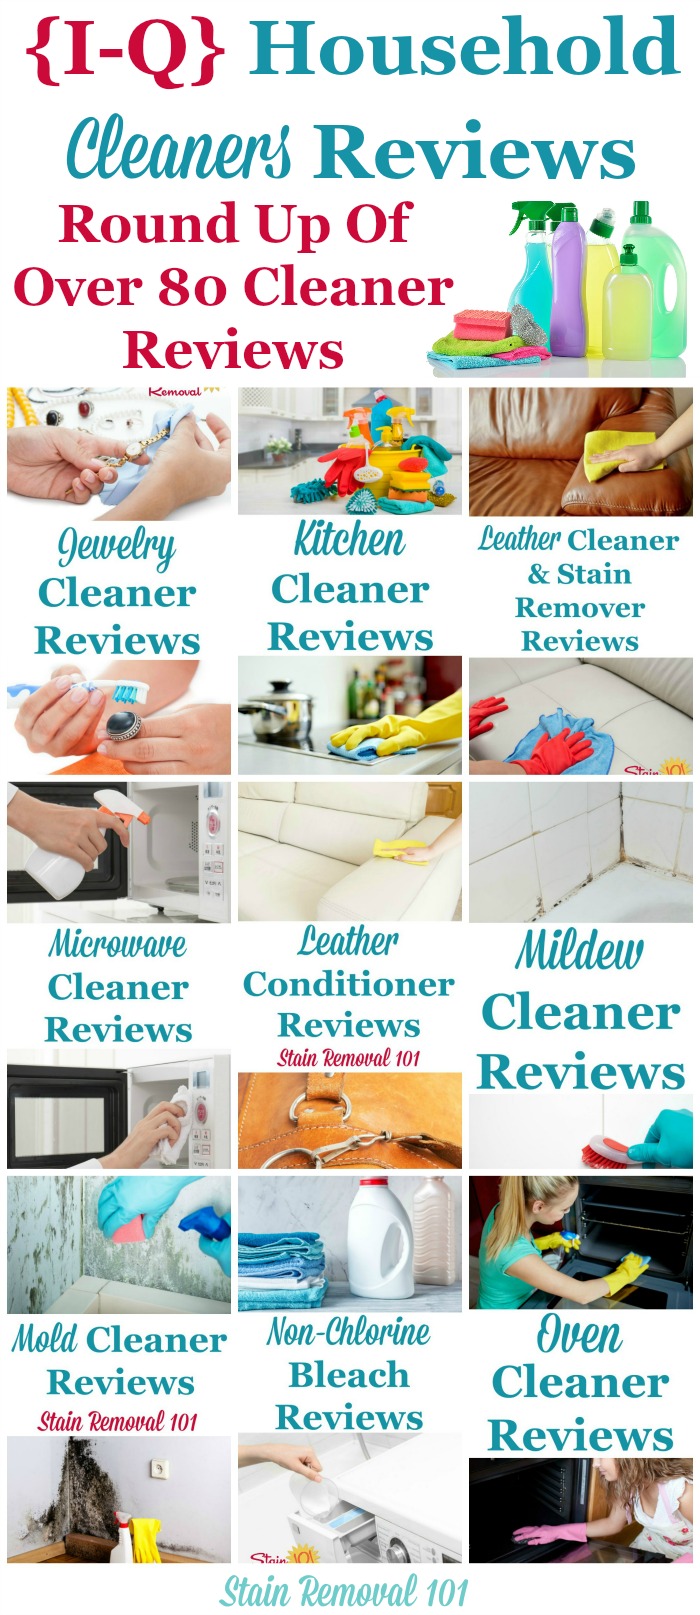 https://www.stain-removal-101.com/image-files/household-cleaners-2.jpg